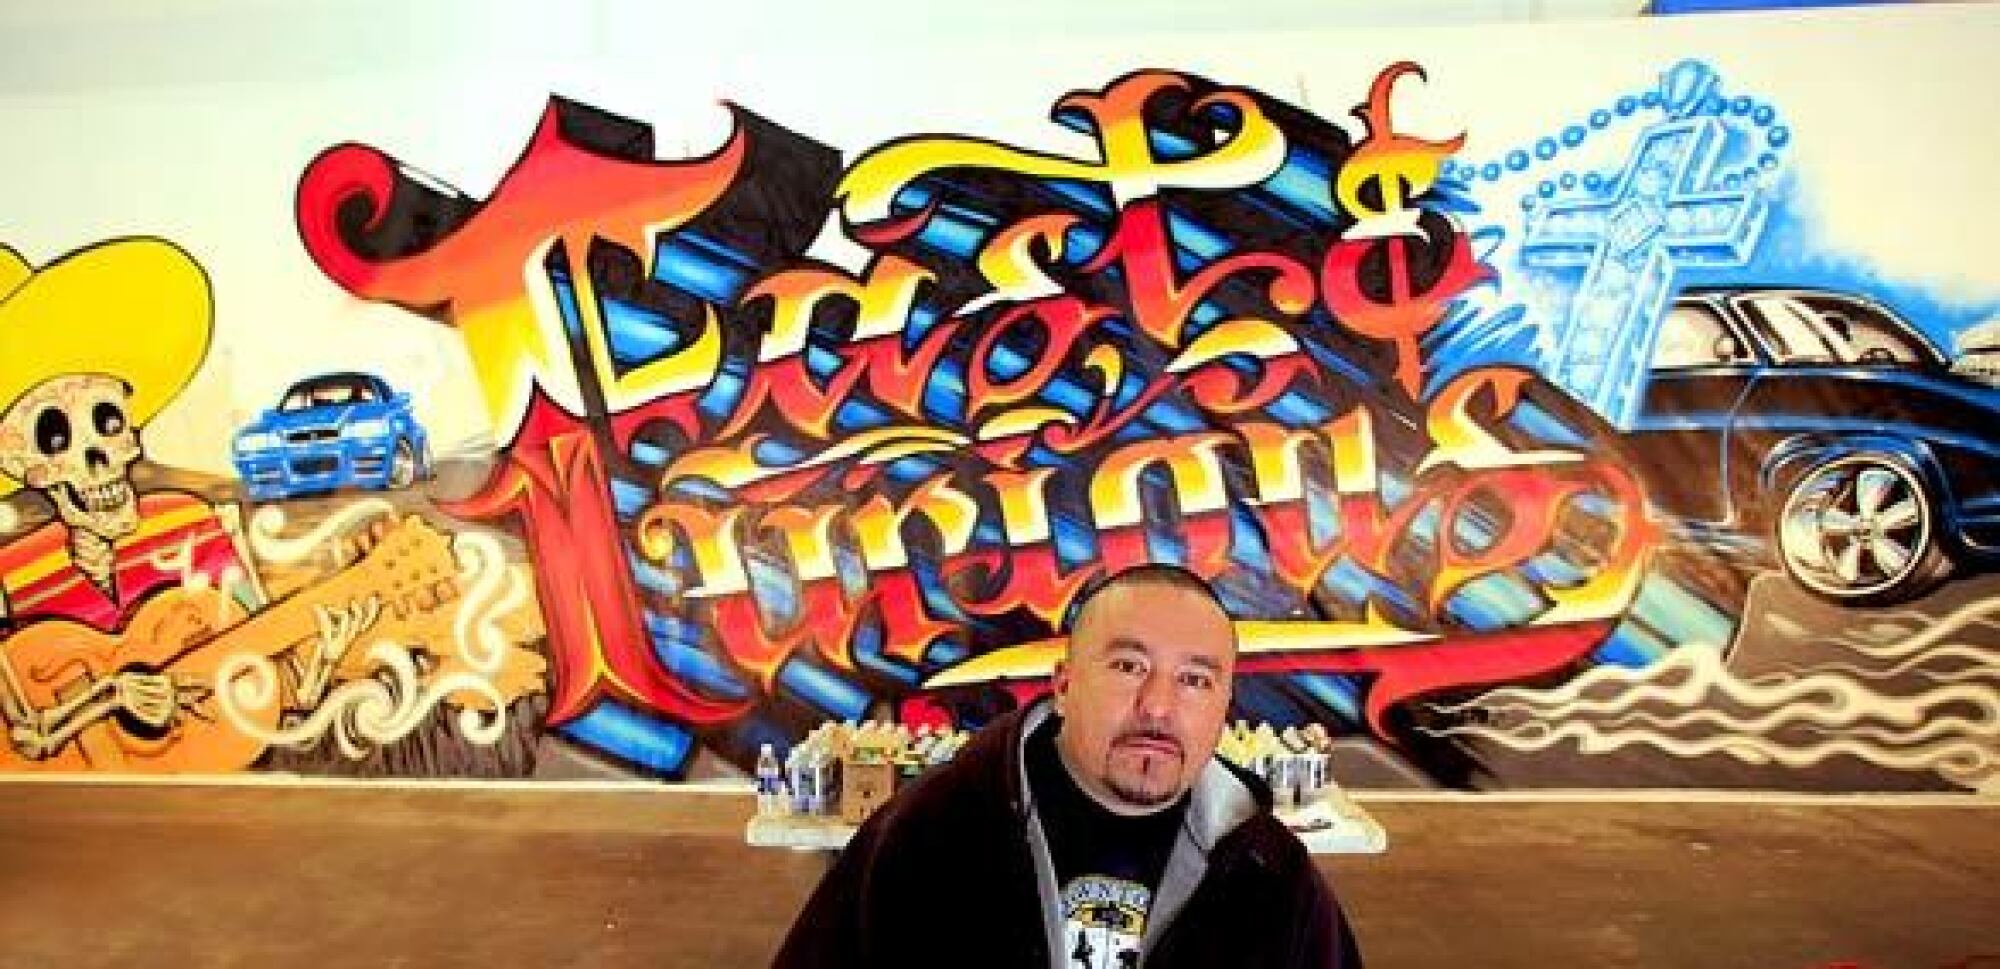 Mister Cartoon, seen here in his L.A. warehouse studio in 2009 working on a billboard commissioned by Universal Studios for "Fast & Furious."